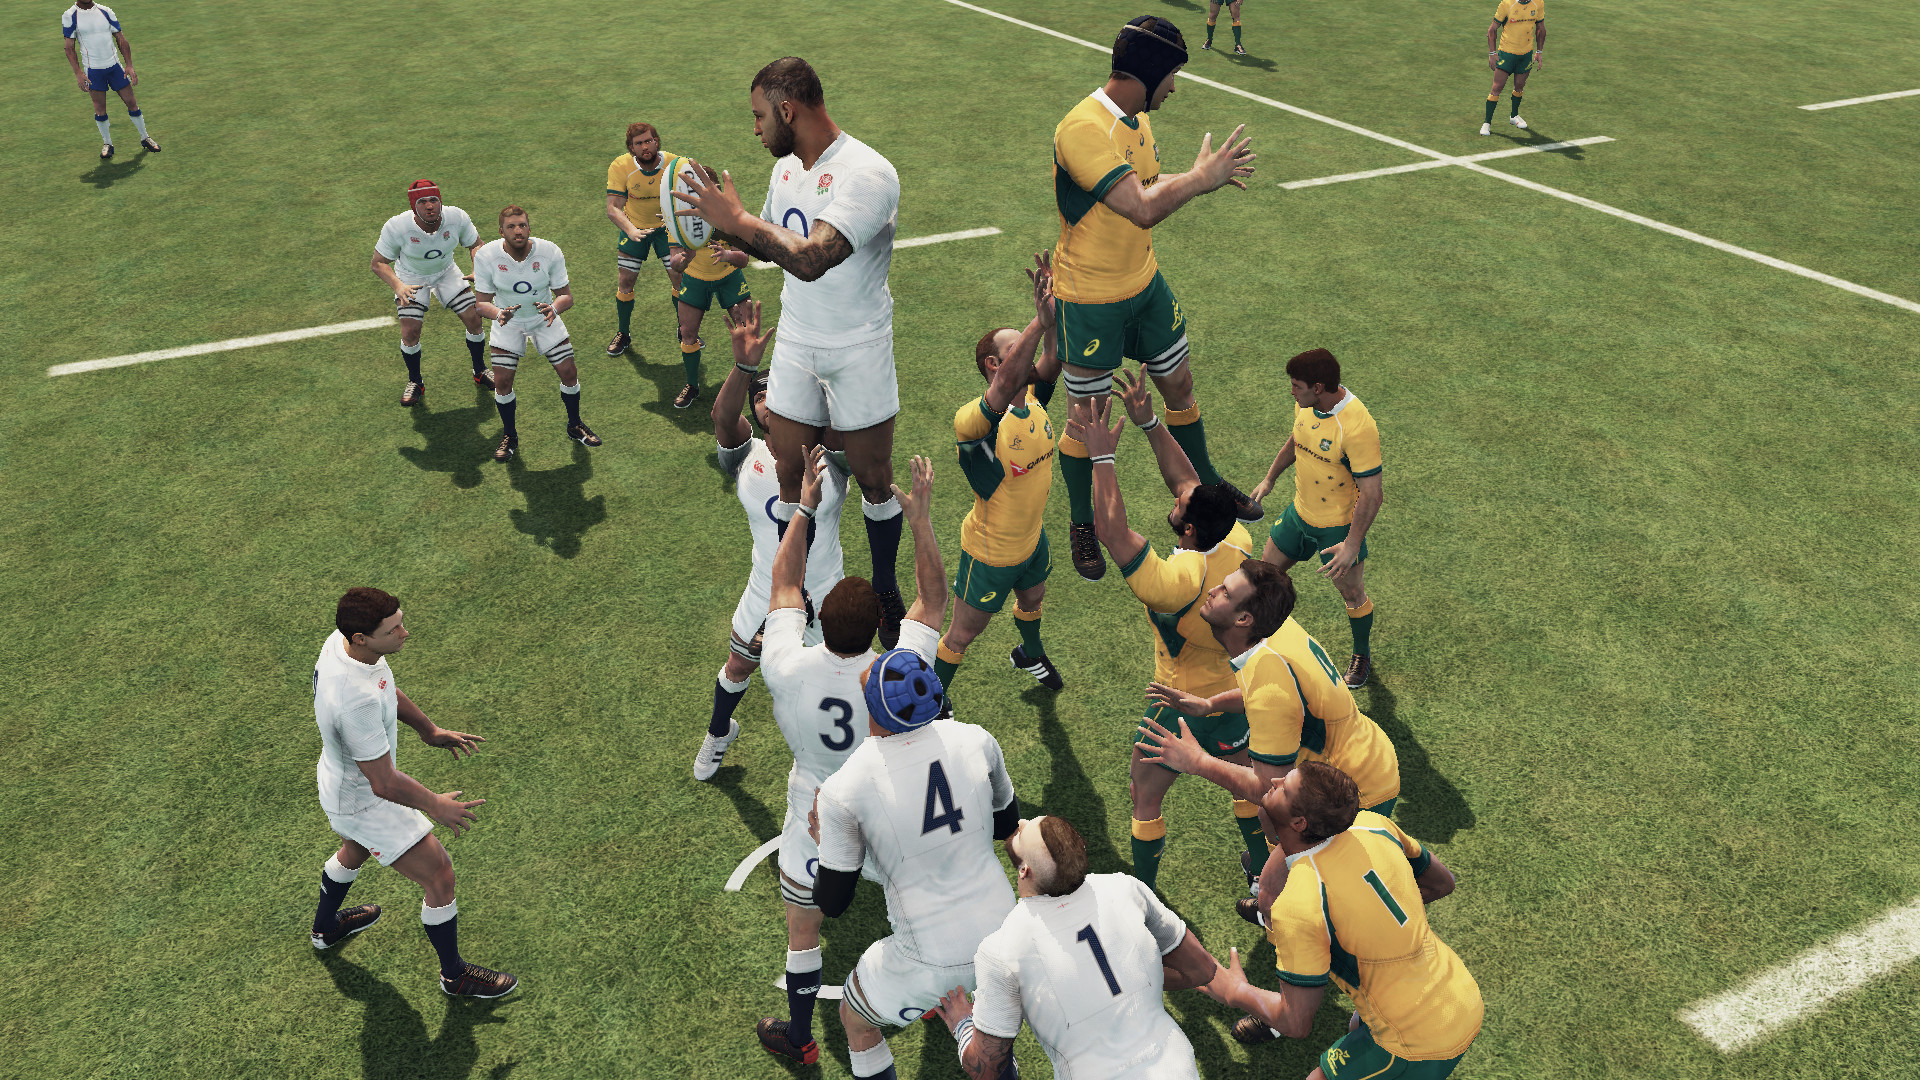 Rugby Challenge 3 Features